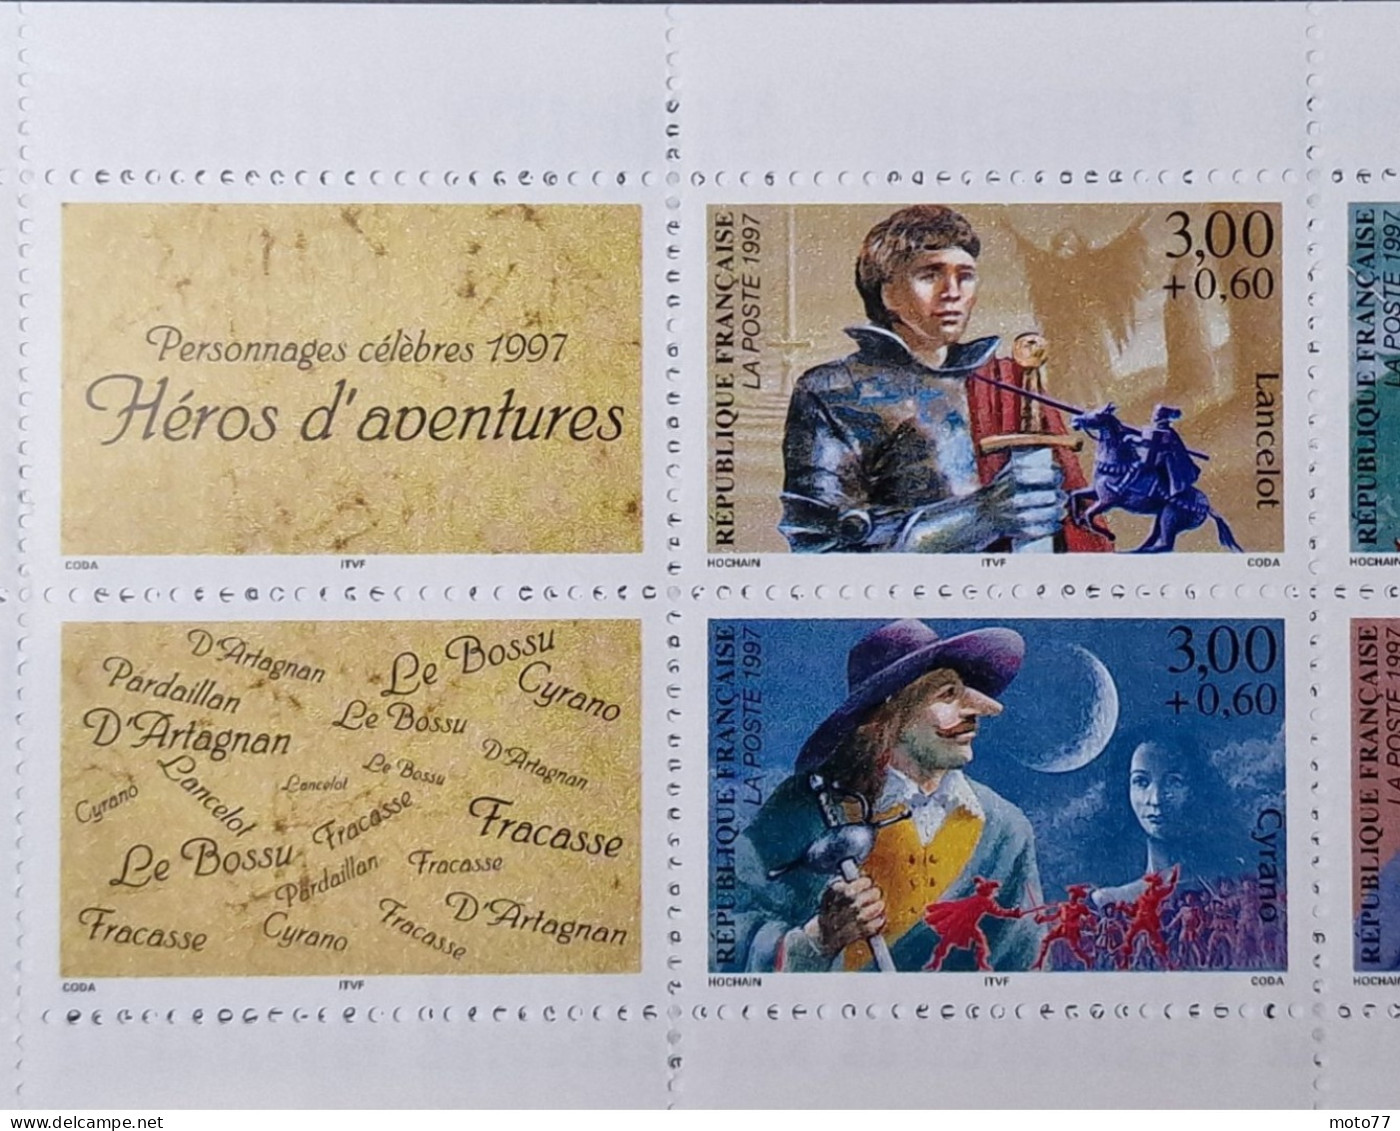 TIMBRE France CARNET Neuf - 1997 N° 3121 Timbres 3051a Et 3052 + A  -Yvert & Tellier 2003 Coté 11 € - Personnages